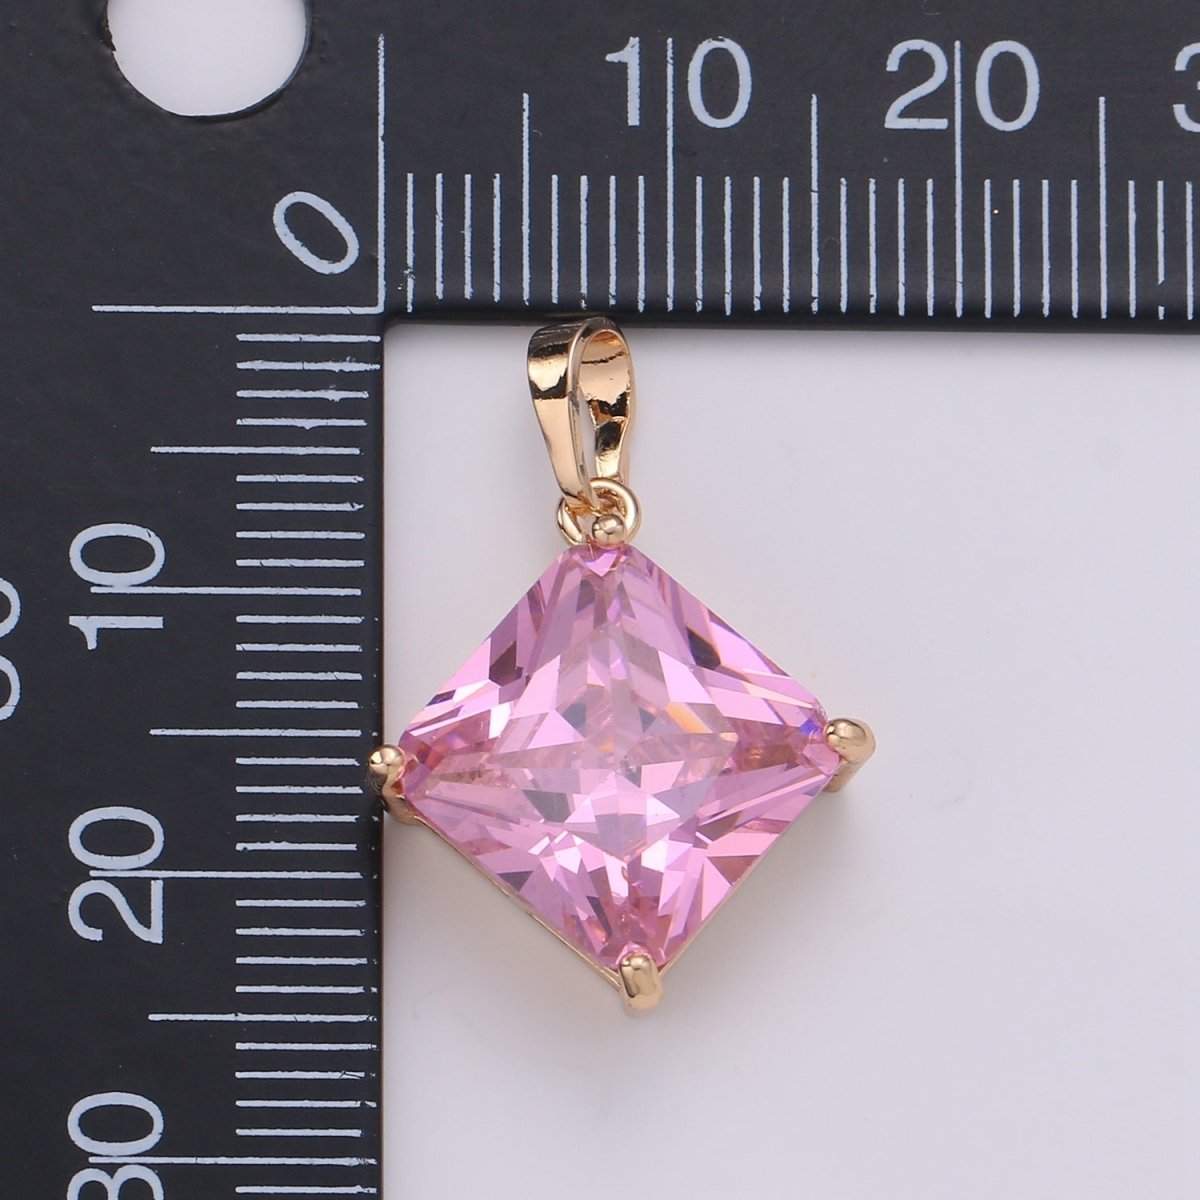 Gemstone Rhombus Charm, Pink Solitaire Cz Pendant, 25x15mm, 18k Gold Filled Pendnt Dangle Jewelry, Necklace Earring Valentine Gift J-113 - DLUXCA